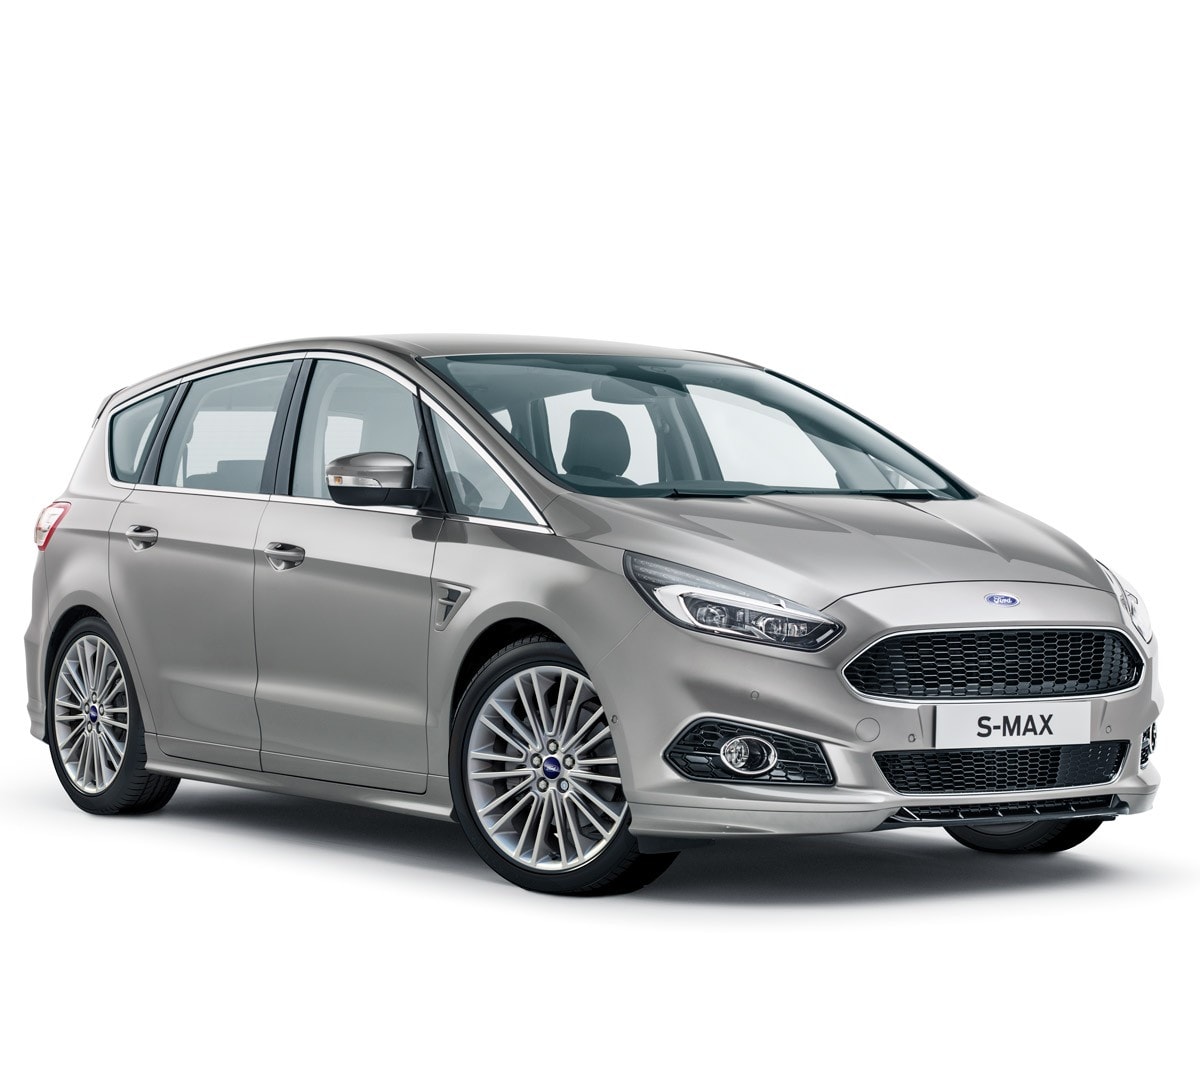 Ford-S-MAX Full body styling kit with upper and lower sports grille